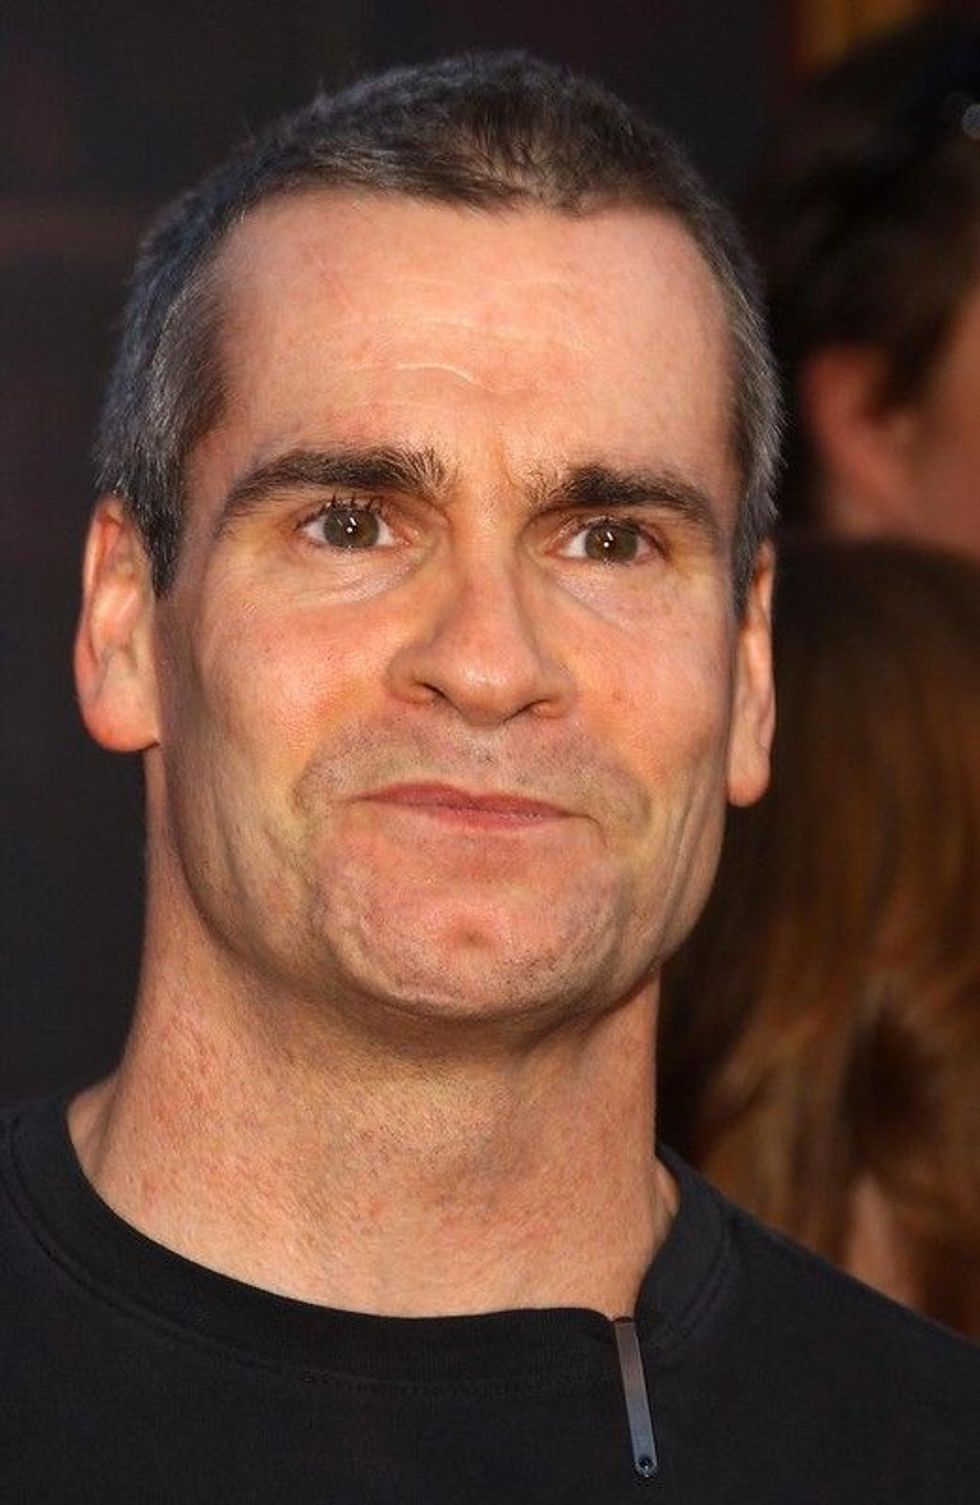 Henry Rollins at the world premiere of "Ratatouille".